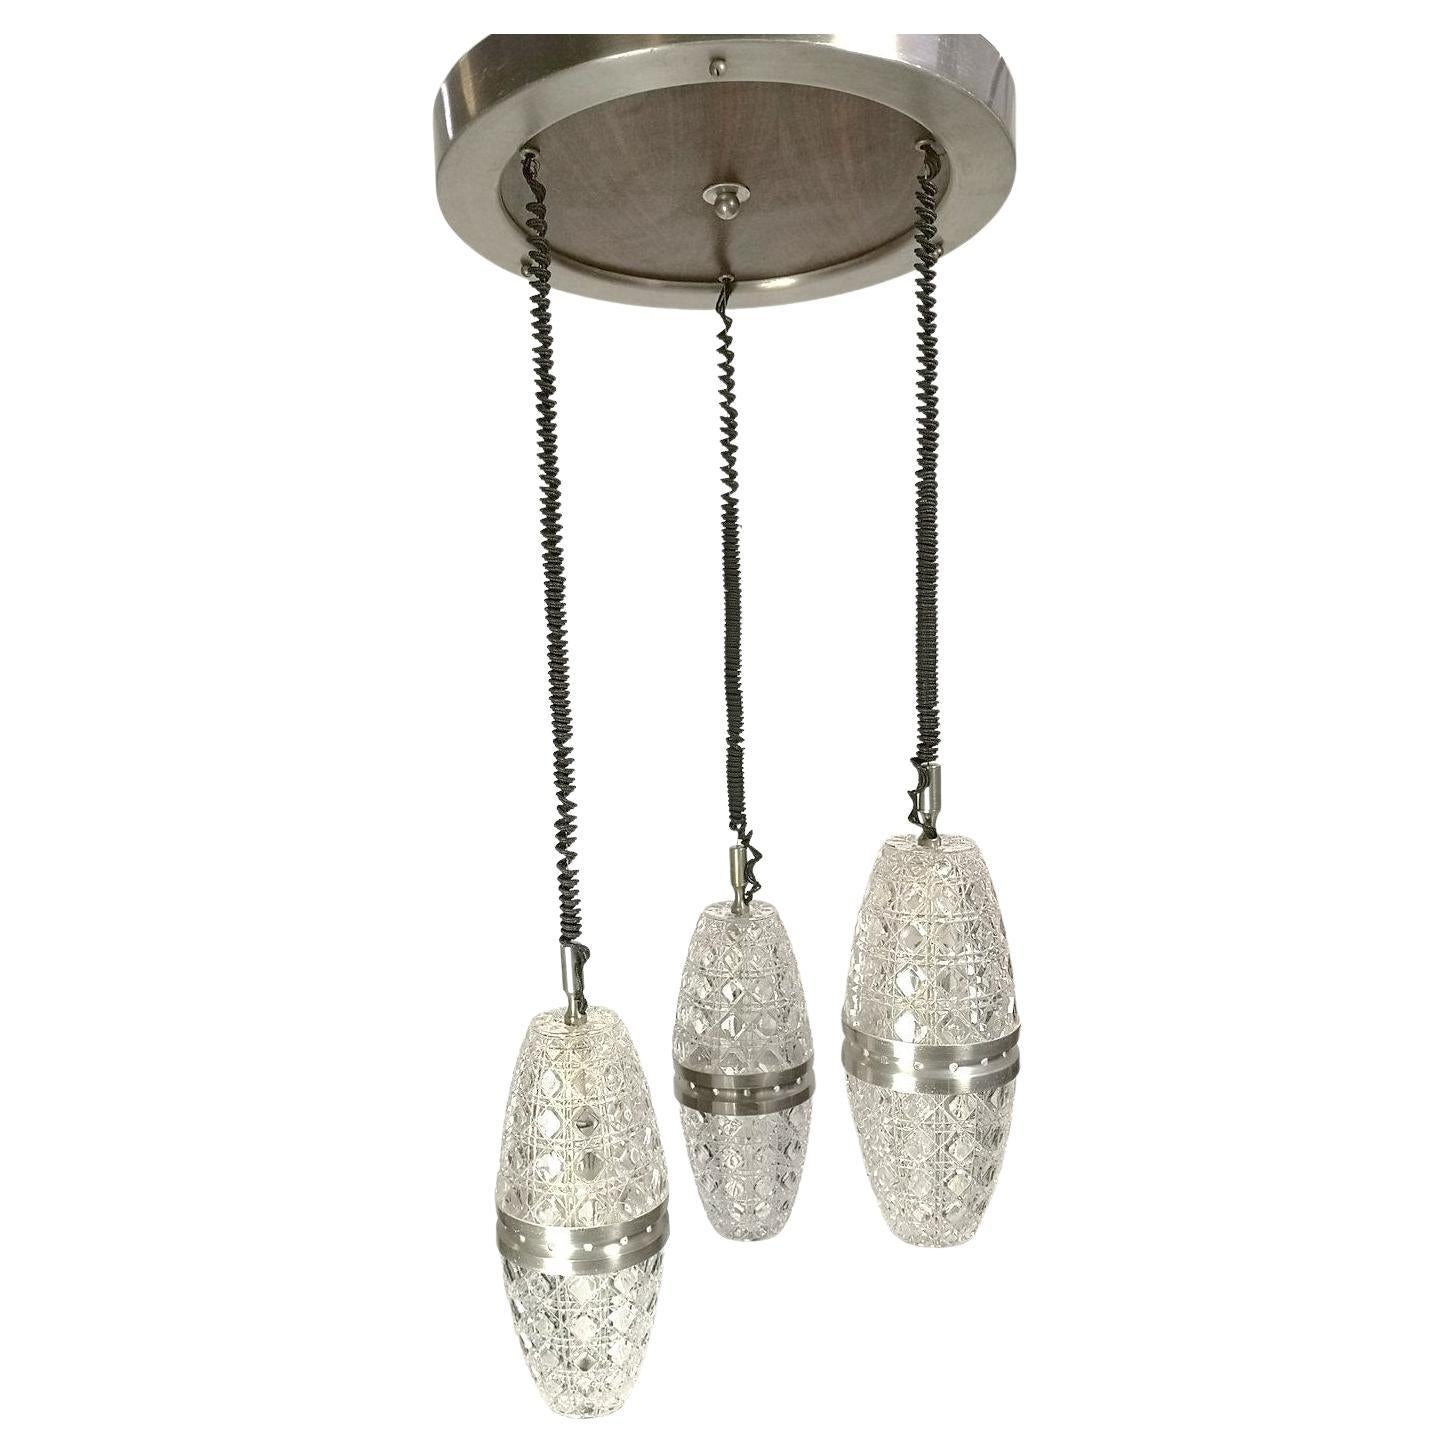 Exquisite Mid-century modern ceiling lamp with crystal light shades (50193) For Sale